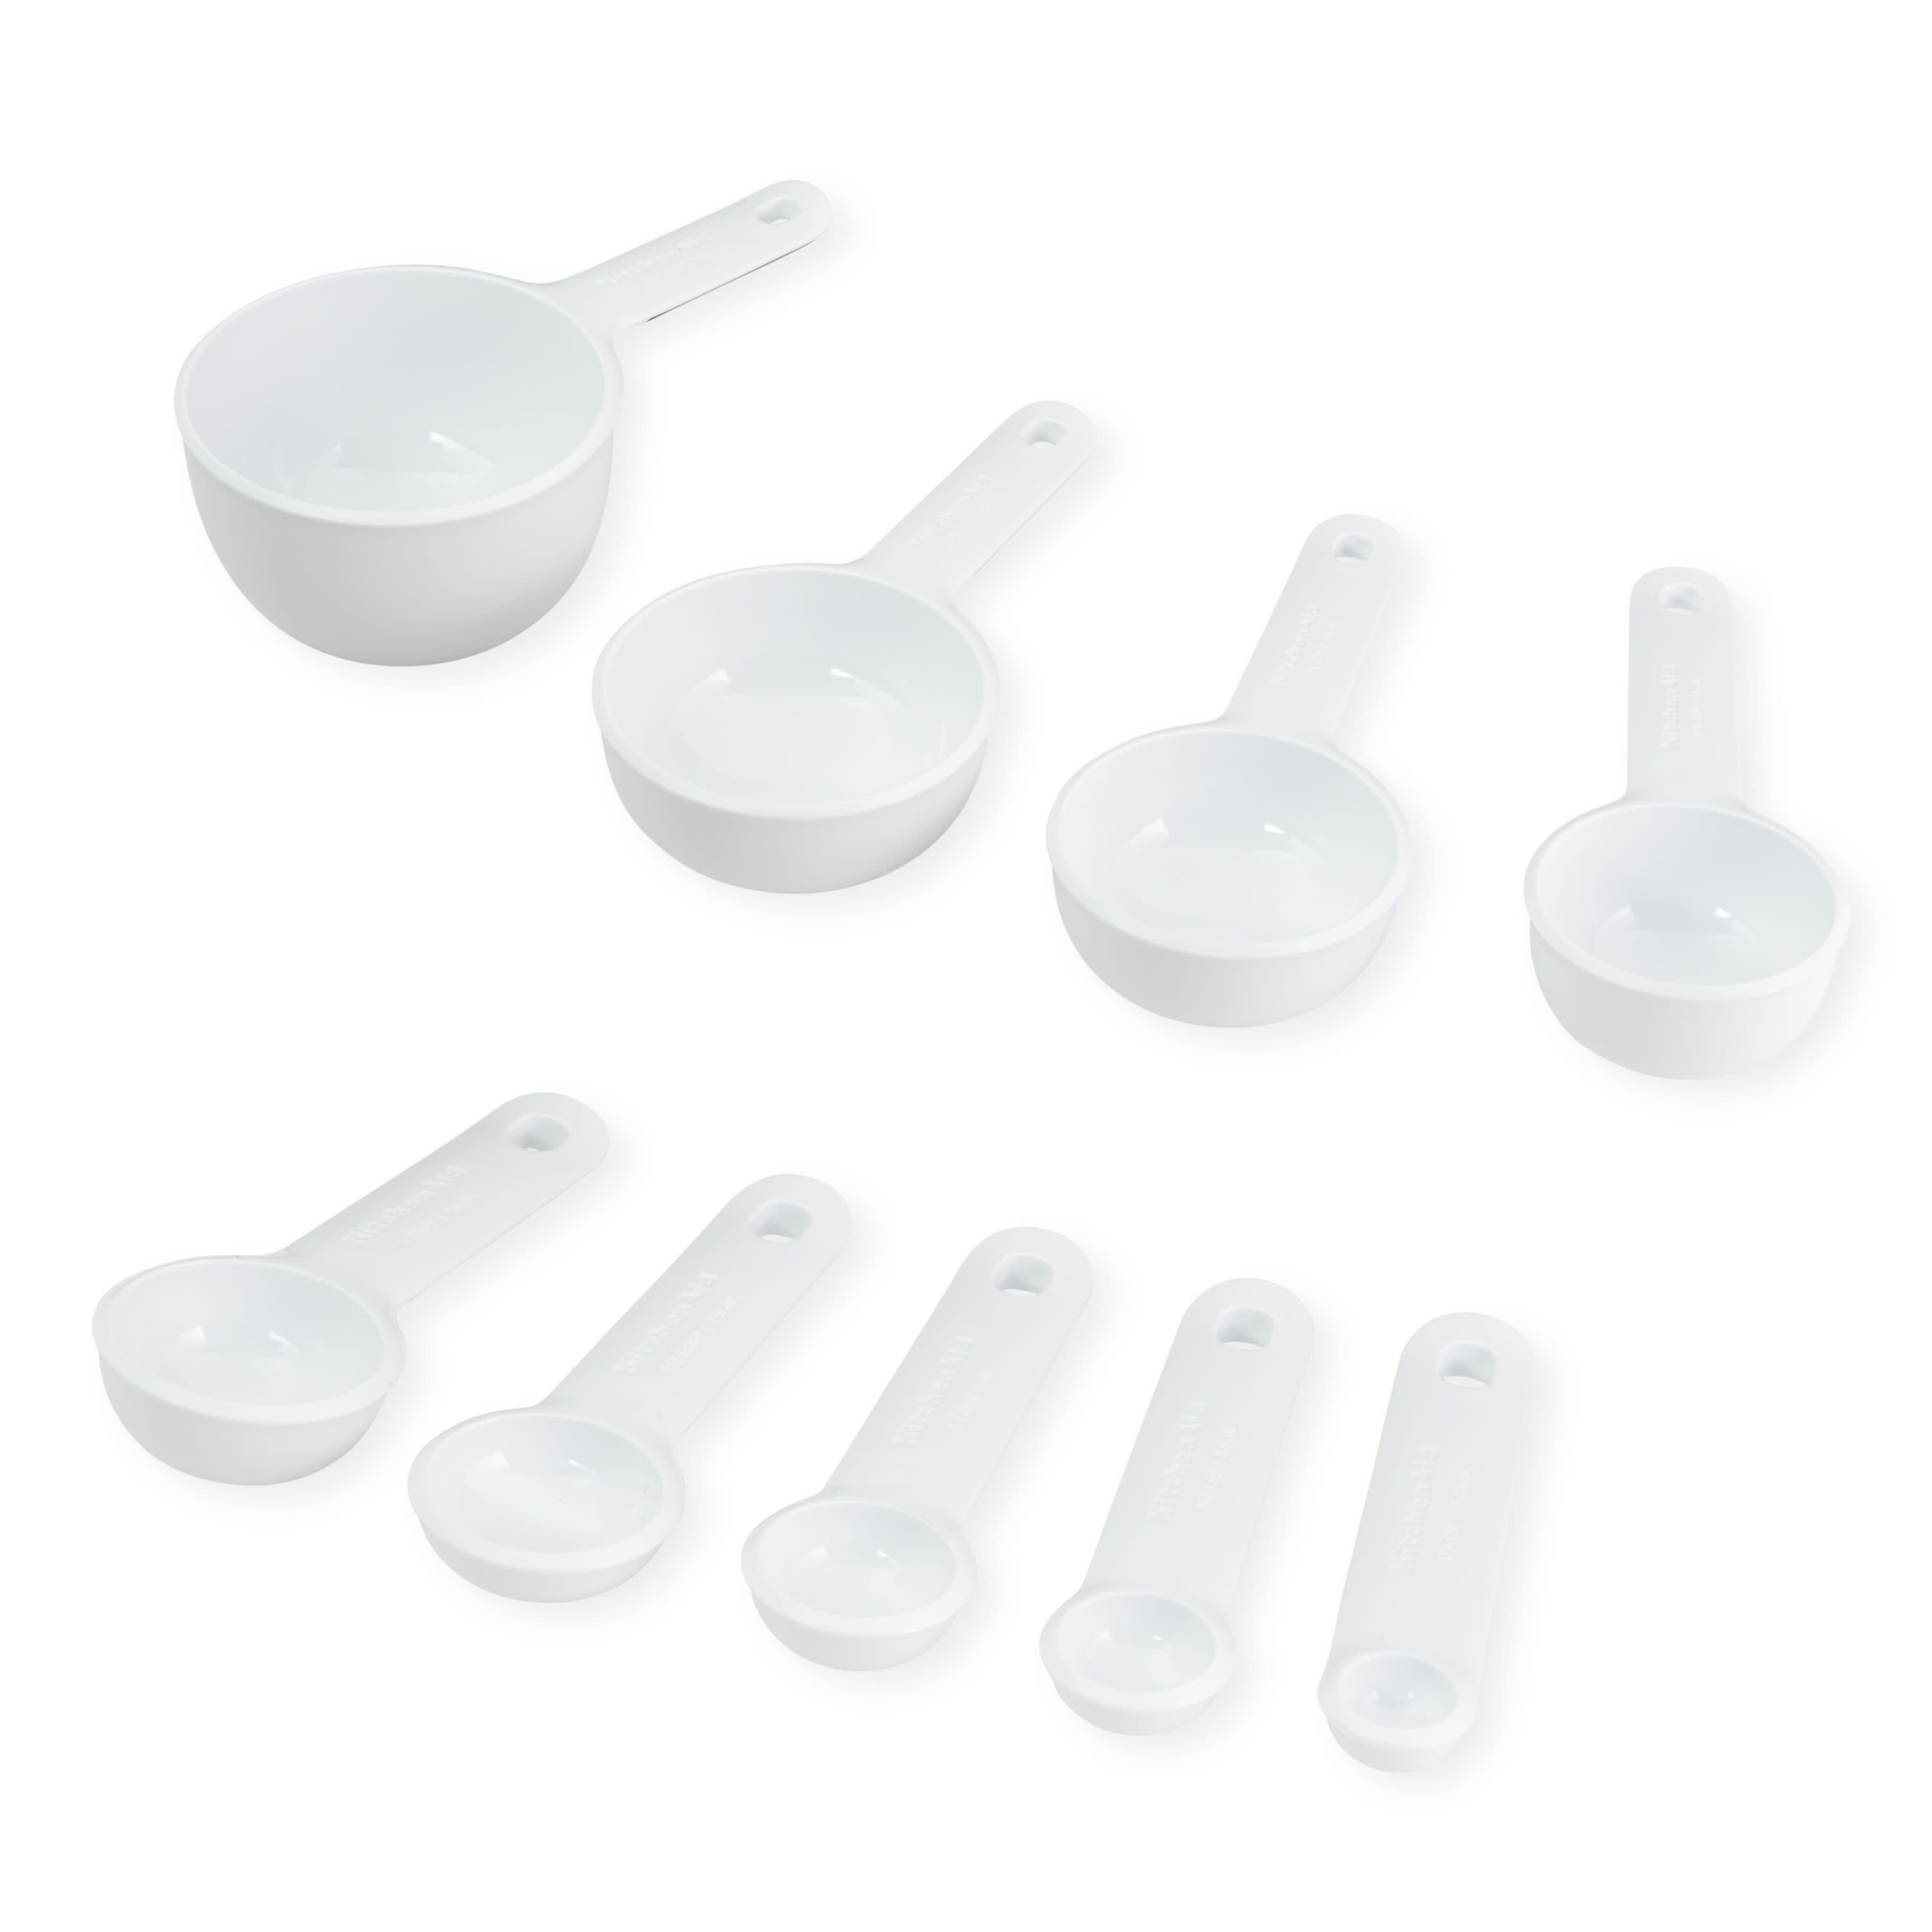 🔥8 PCS/SET AESTHETIC MEASURING CUP AND MEASURING SPOON 🔥 BAKING TOOLS